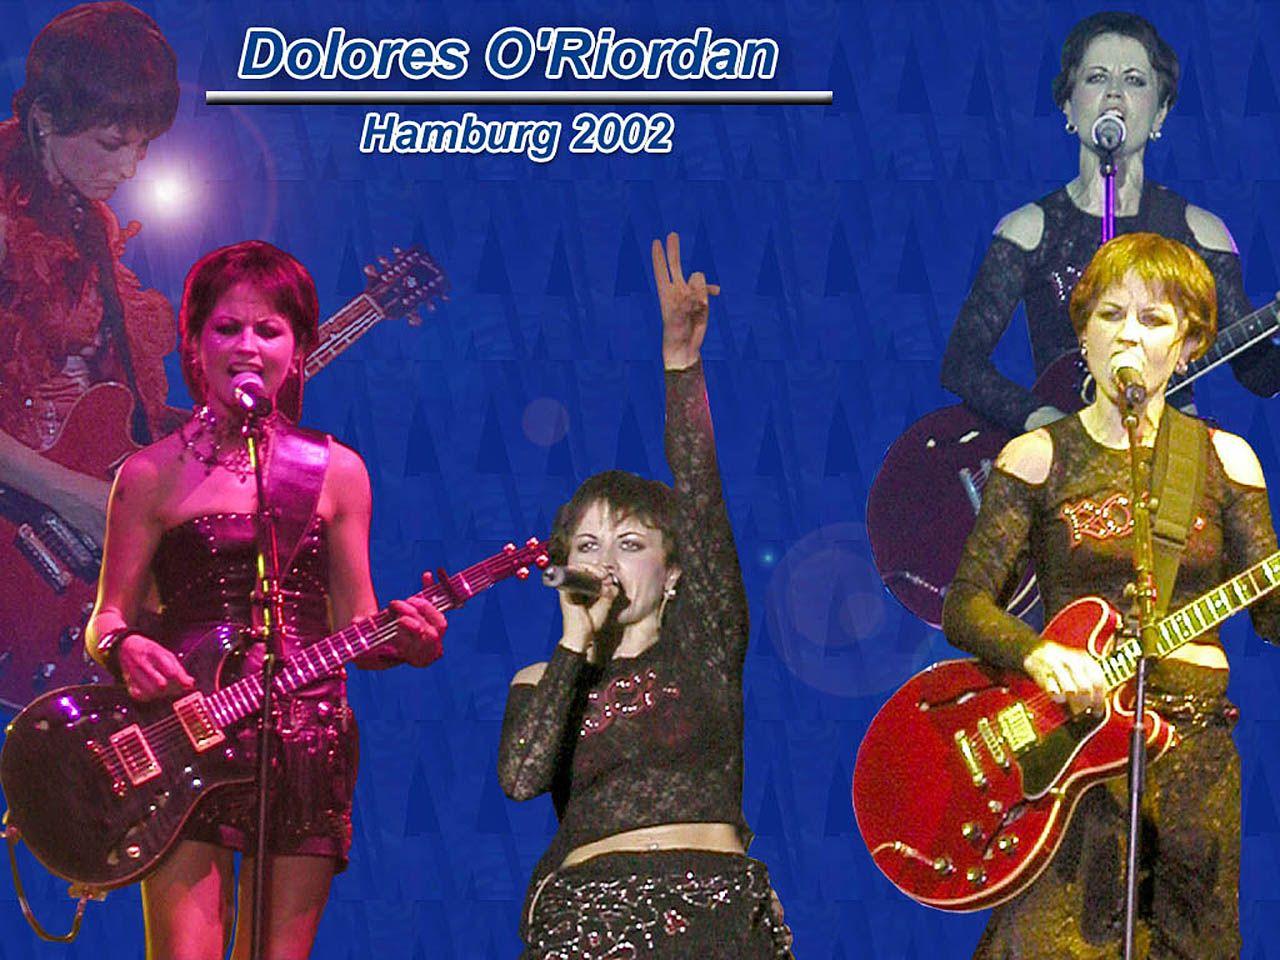 The Cranberries image Dolores O'Riordan HD wallpaper and background